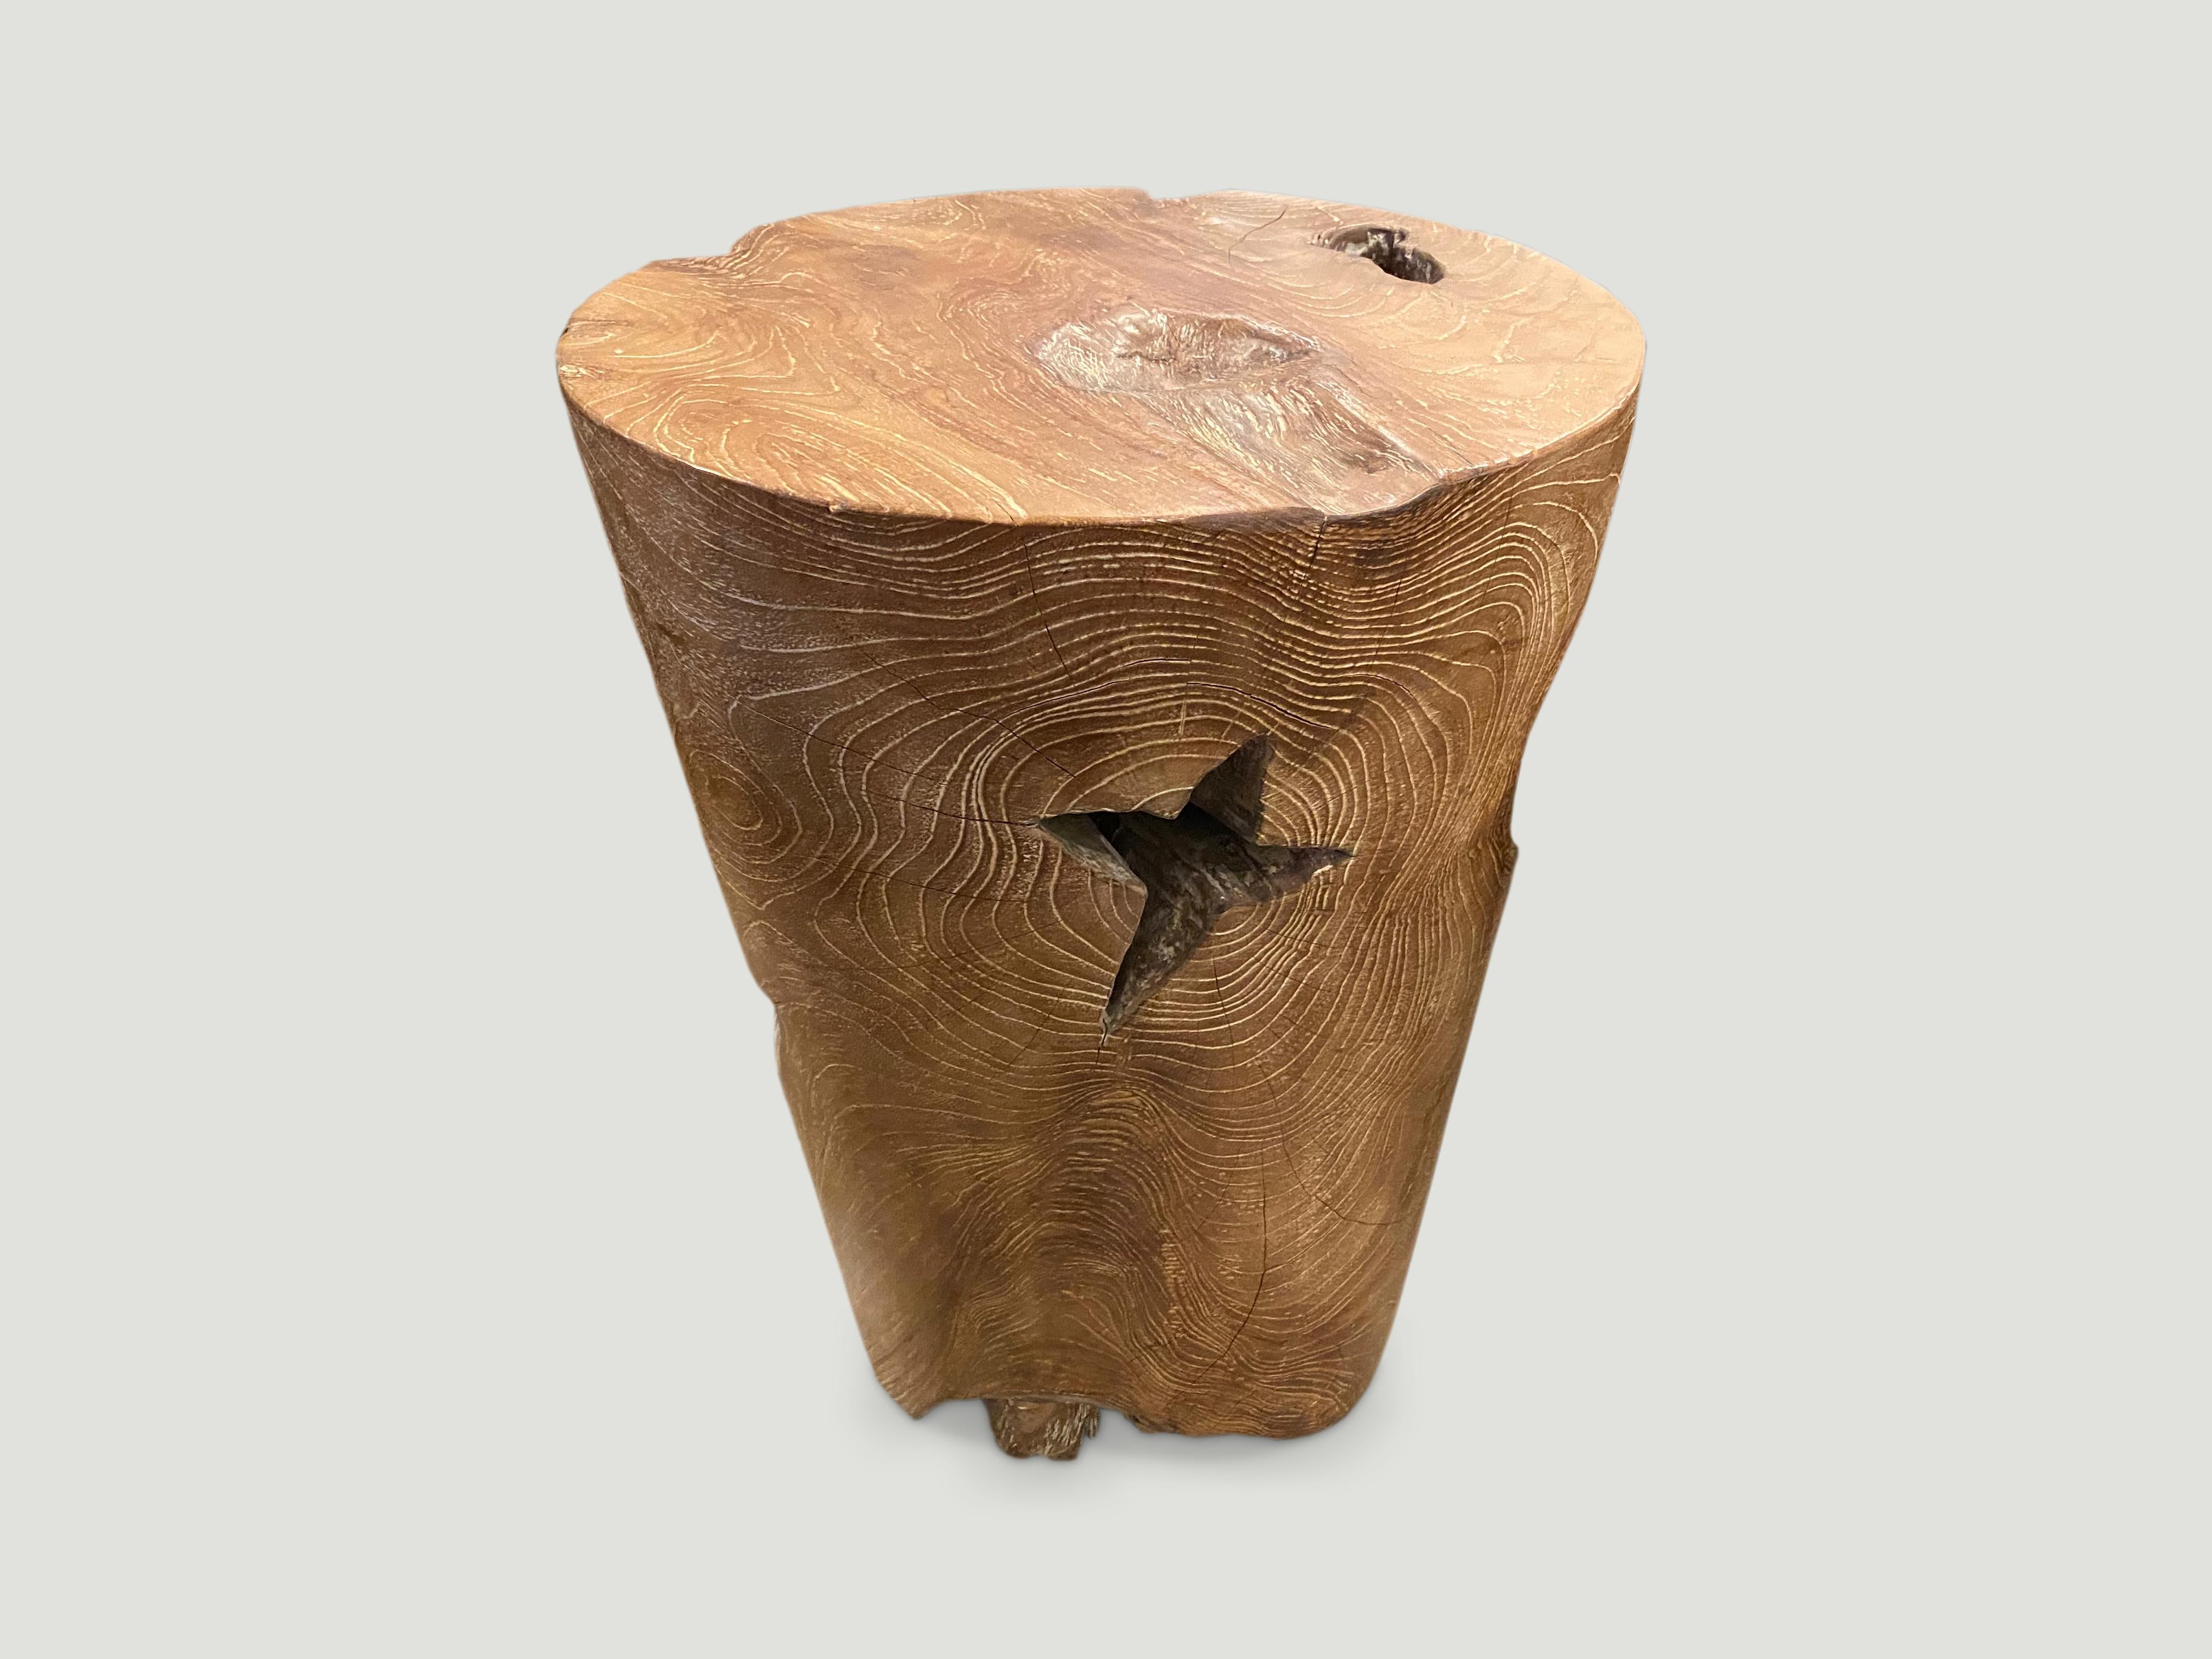 Contemporary Andrianna Shamaris Organic Cerused Teak Wood Side Table or Pedestal For Sale